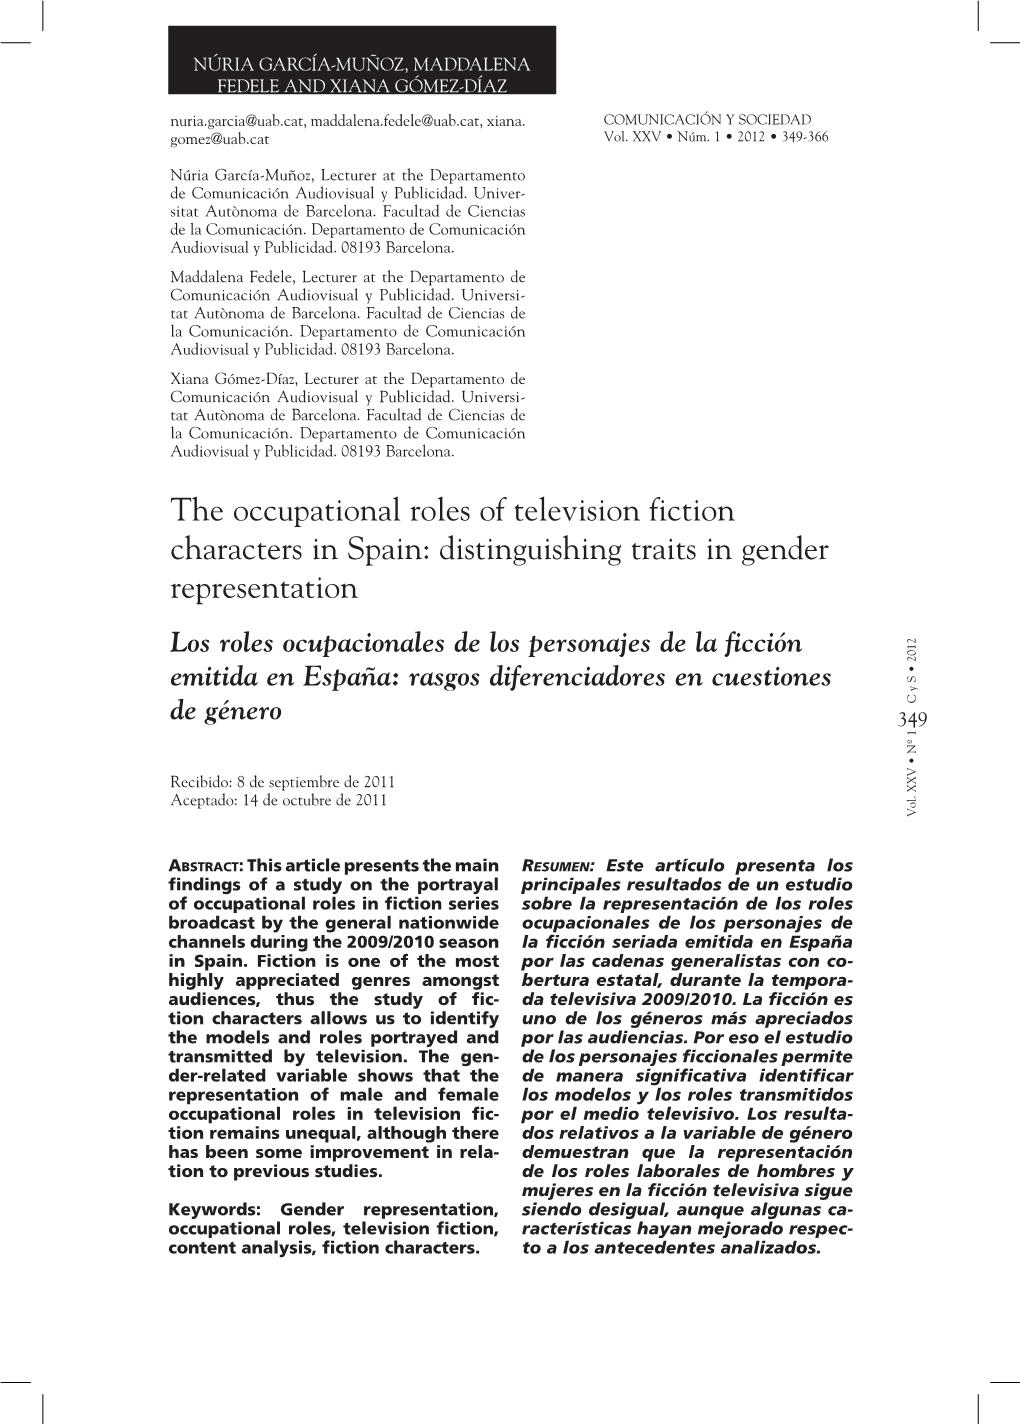 The Occupational Roles of Television Fiction Characters in Spain: Distinguishing Traits In